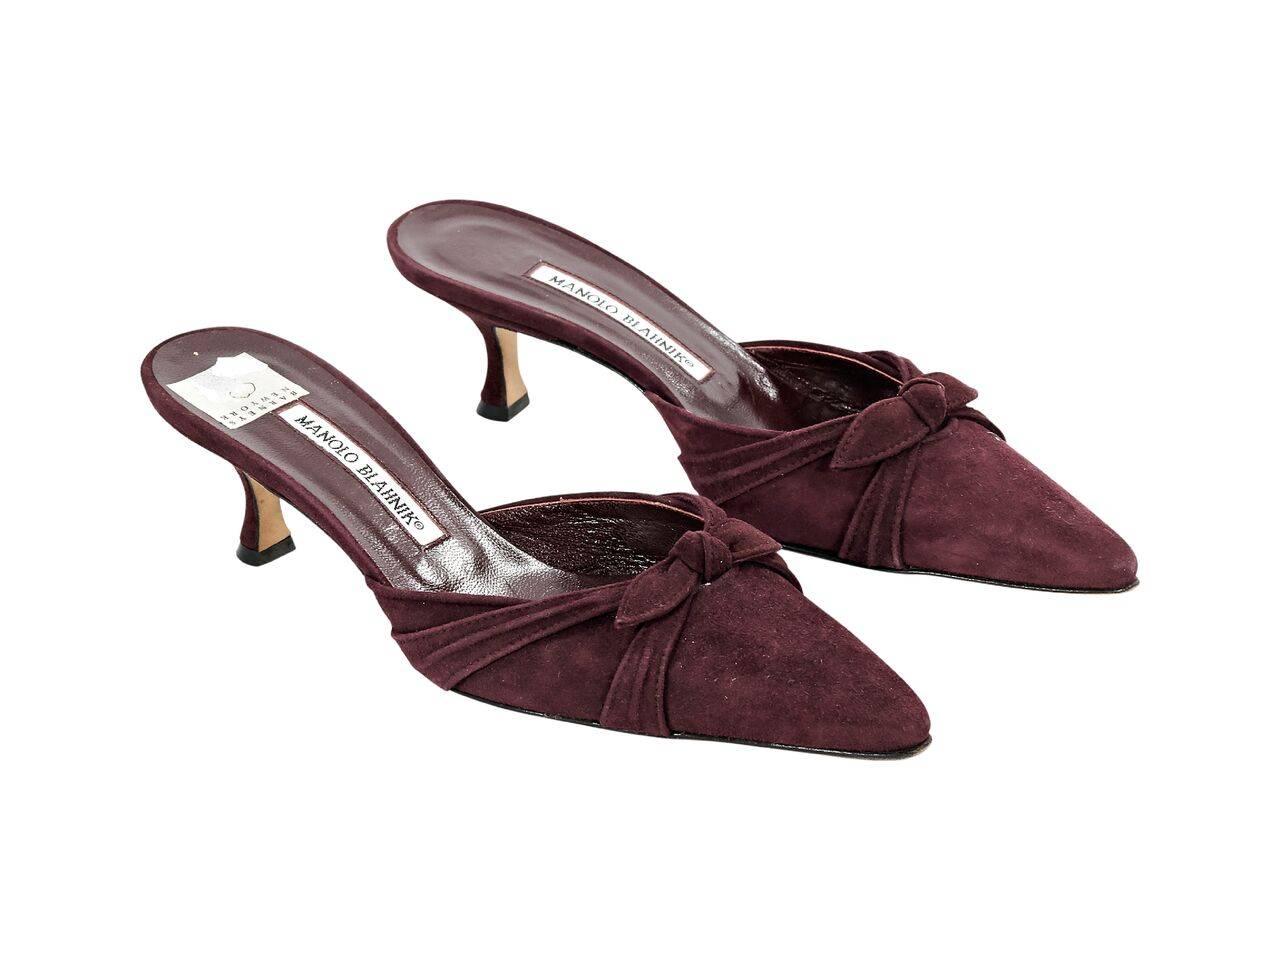 Product details:  Burgundy suede mules by Manolo Blahnik.  Bow and pleats accent vamp.  Point toe.  Low kitten heel.  Slip-on style. 
Condition: Pre-owned. Very good.
Est. Retail $ 398.00